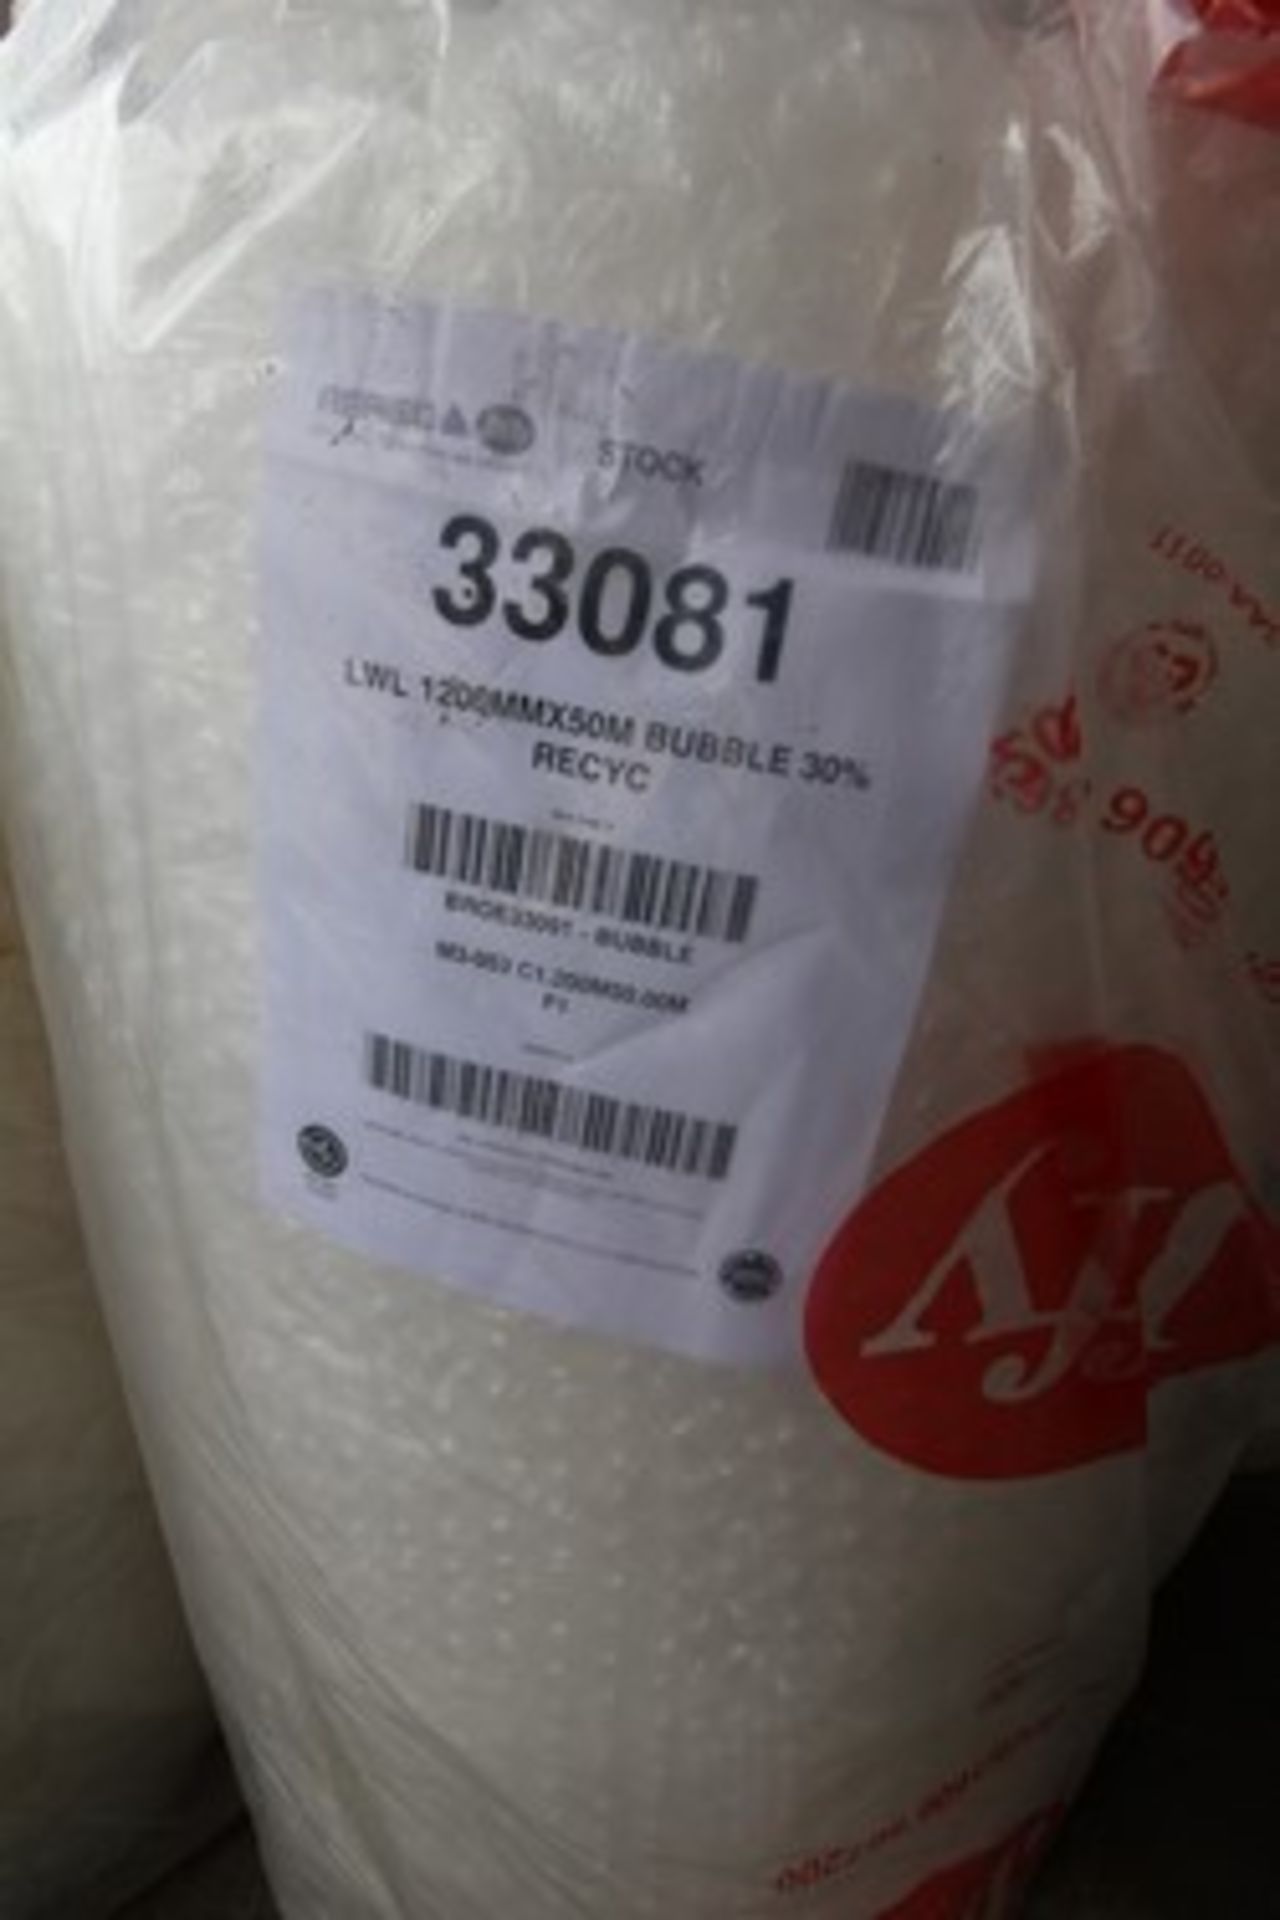 10 x assorted rolls of Jiffy bubble wrap including LWL, size 1200mm x 50m (M3-053C1), SL20, size - Image 2 of 3